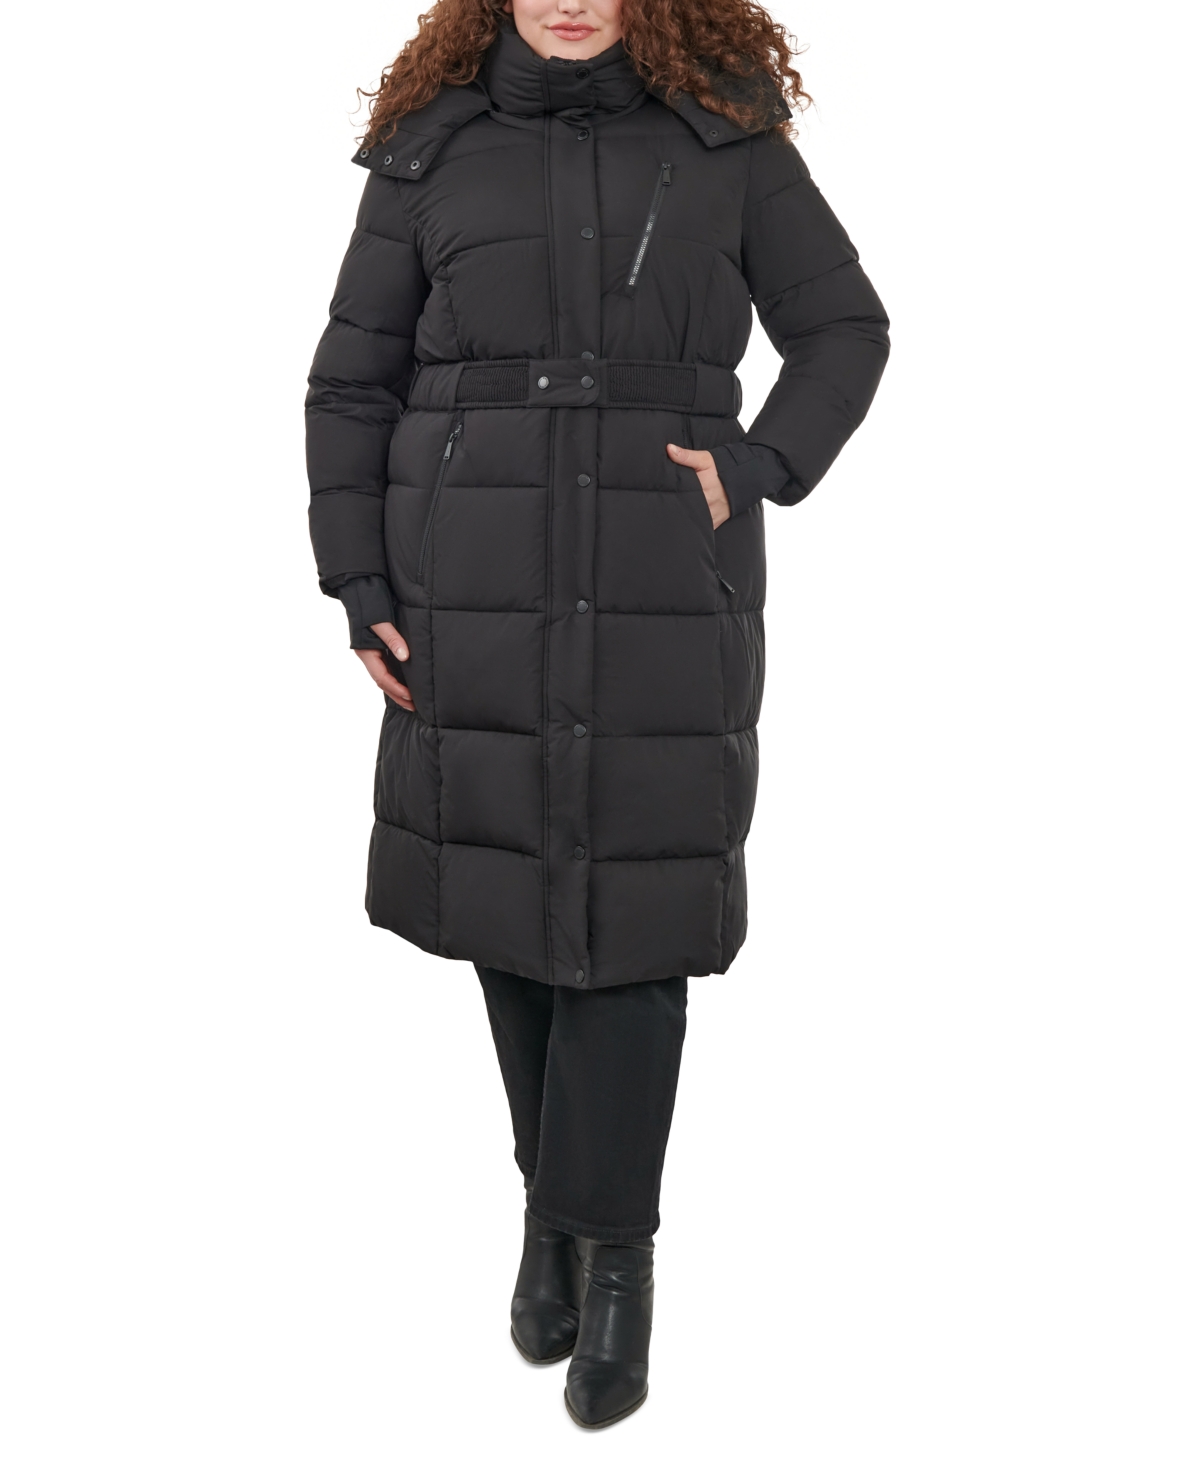 Women's Plus Size Belted Hooded Puffer Coat - Emerald